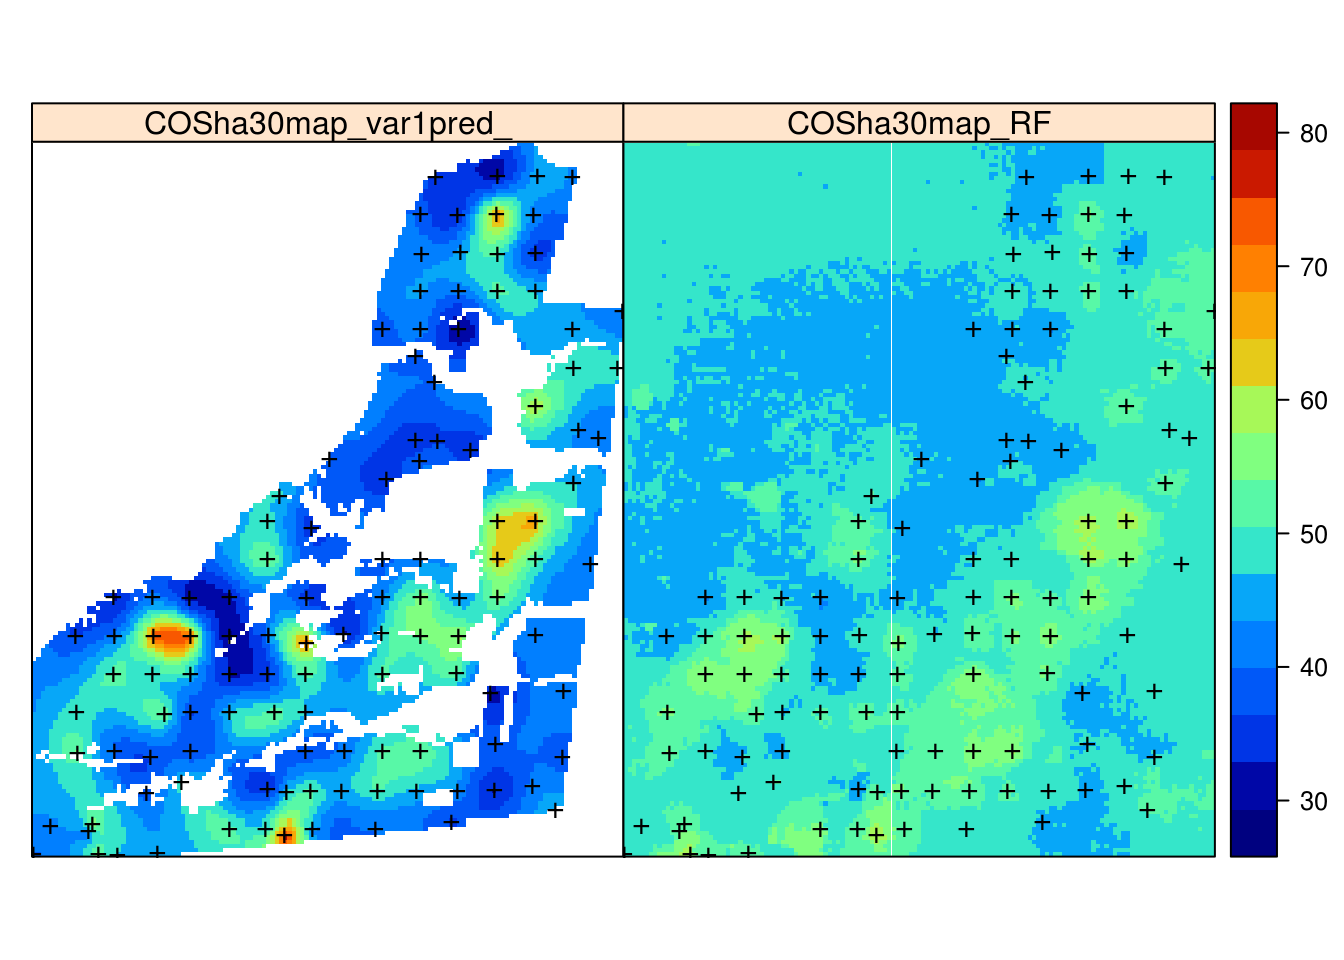 Comparison of predictions generated using ordinary kriging (left) and machine learning with the help of 30 m resolution covariates and buffer distances (right).